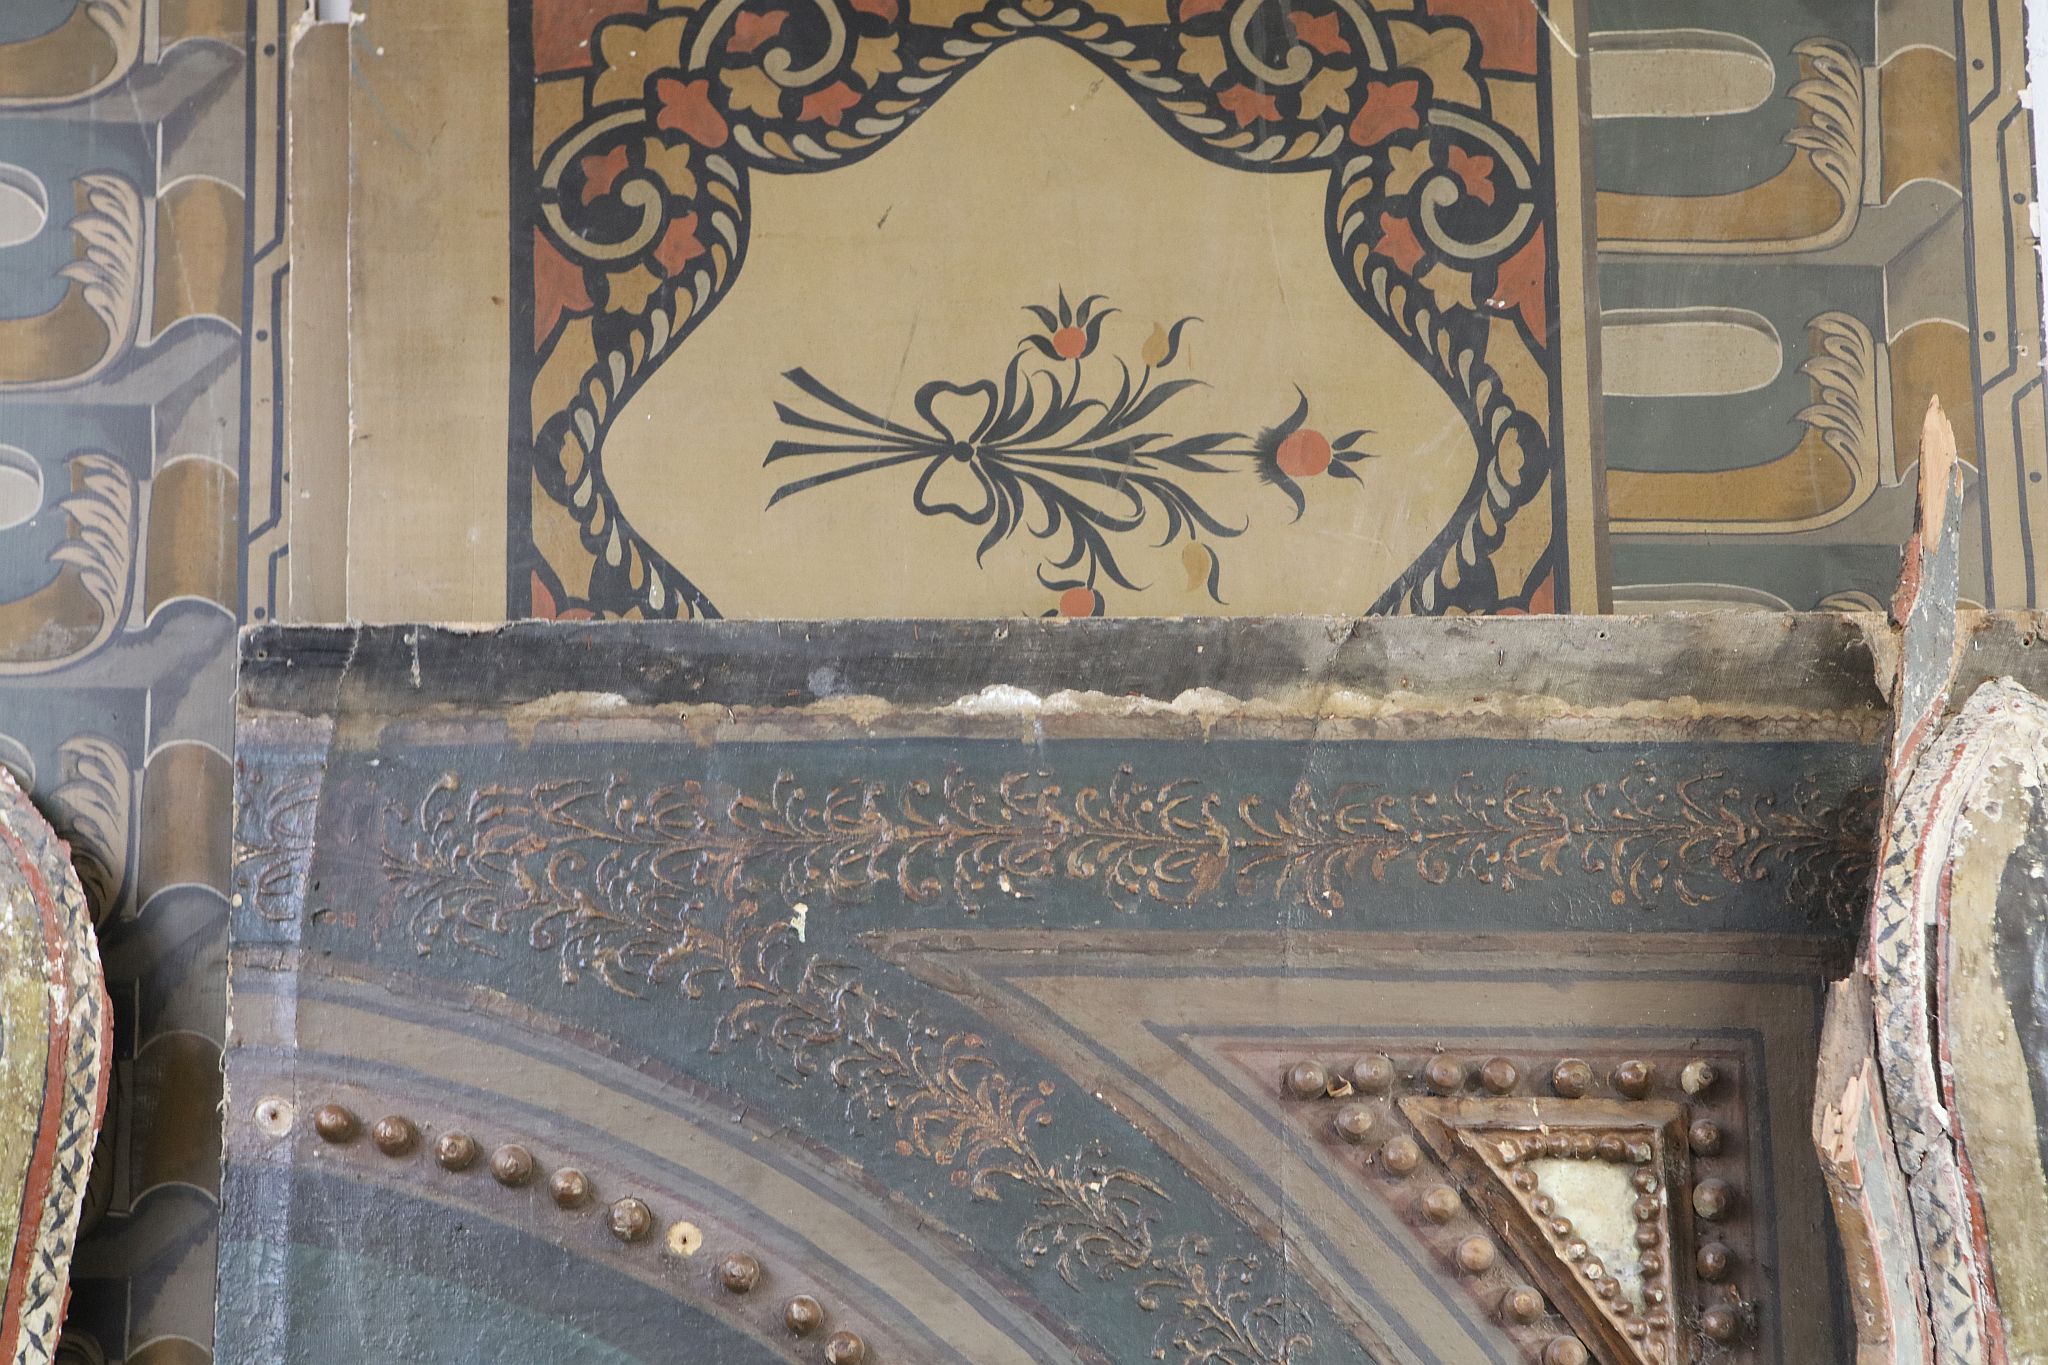 A LATE 18TH / EARLY 19TH CENTURY SYRIAN (DAMASCUS) DECORATIVE INTERIOR / ROOM comprising various - Image 3 of 4